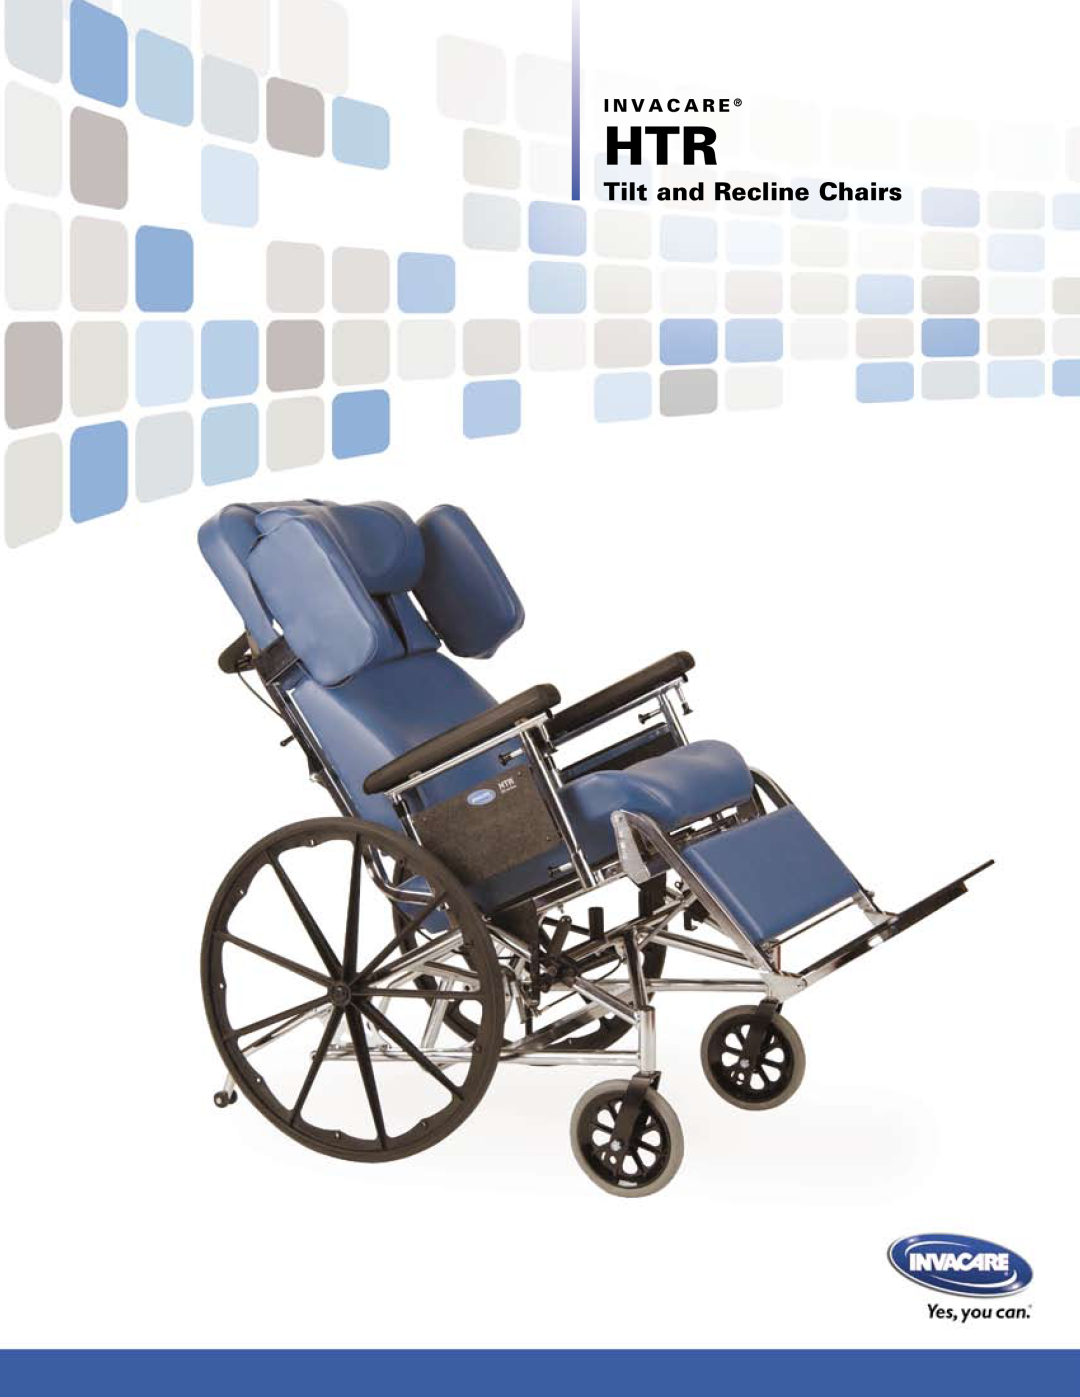 Invacare HTR3000 manual I N V A C A R E, Tilt and Recline Chairs 